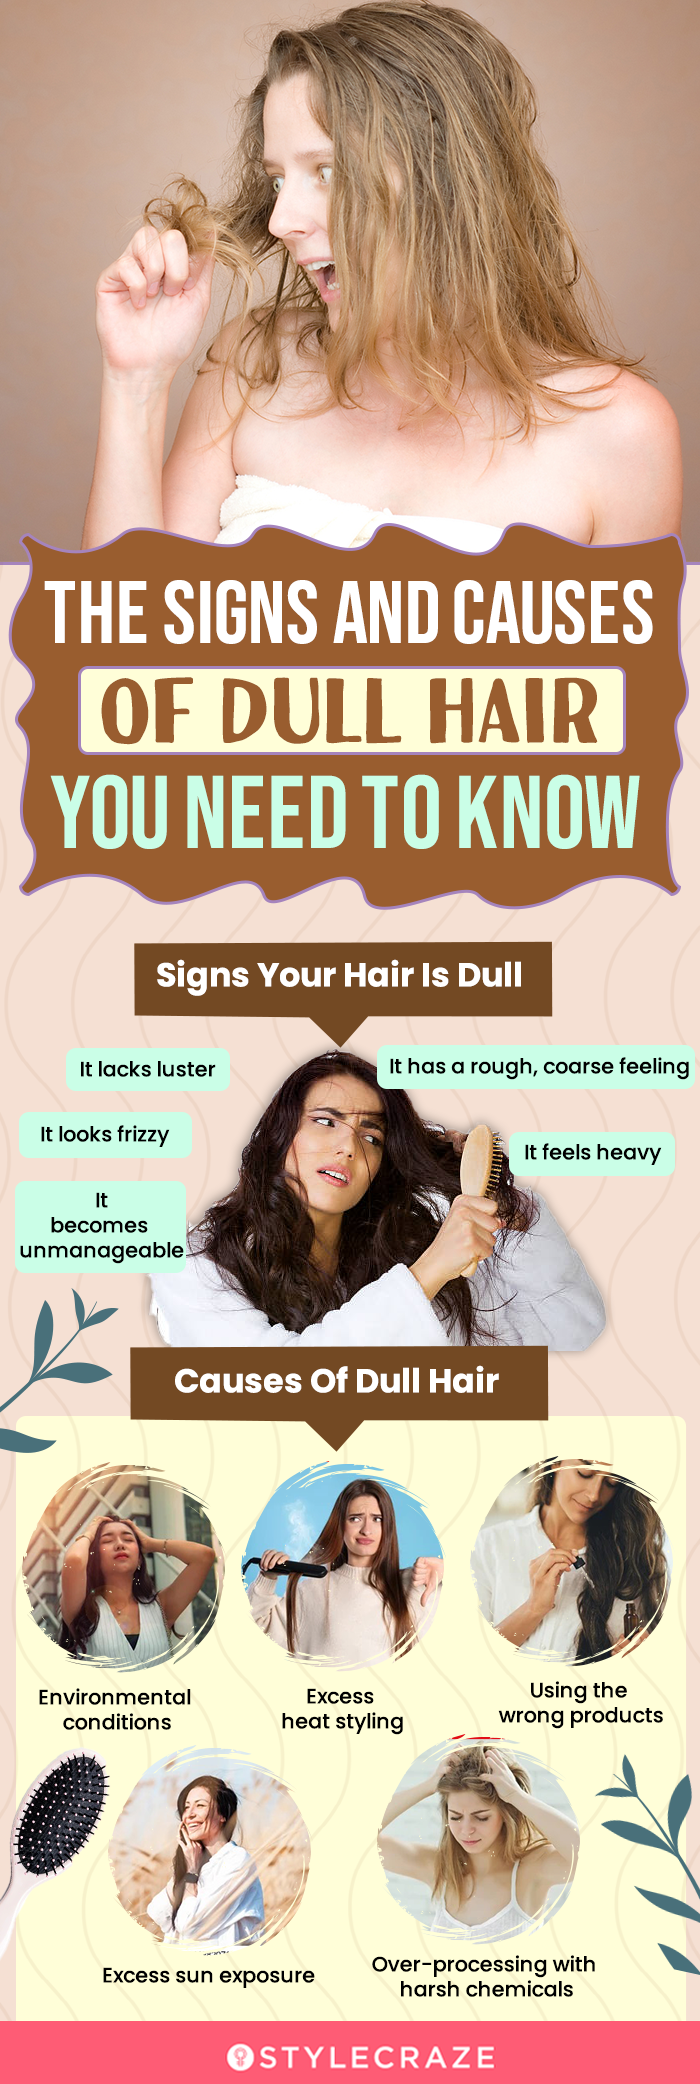 the signs and causes of dull hair you need to know (infographic)